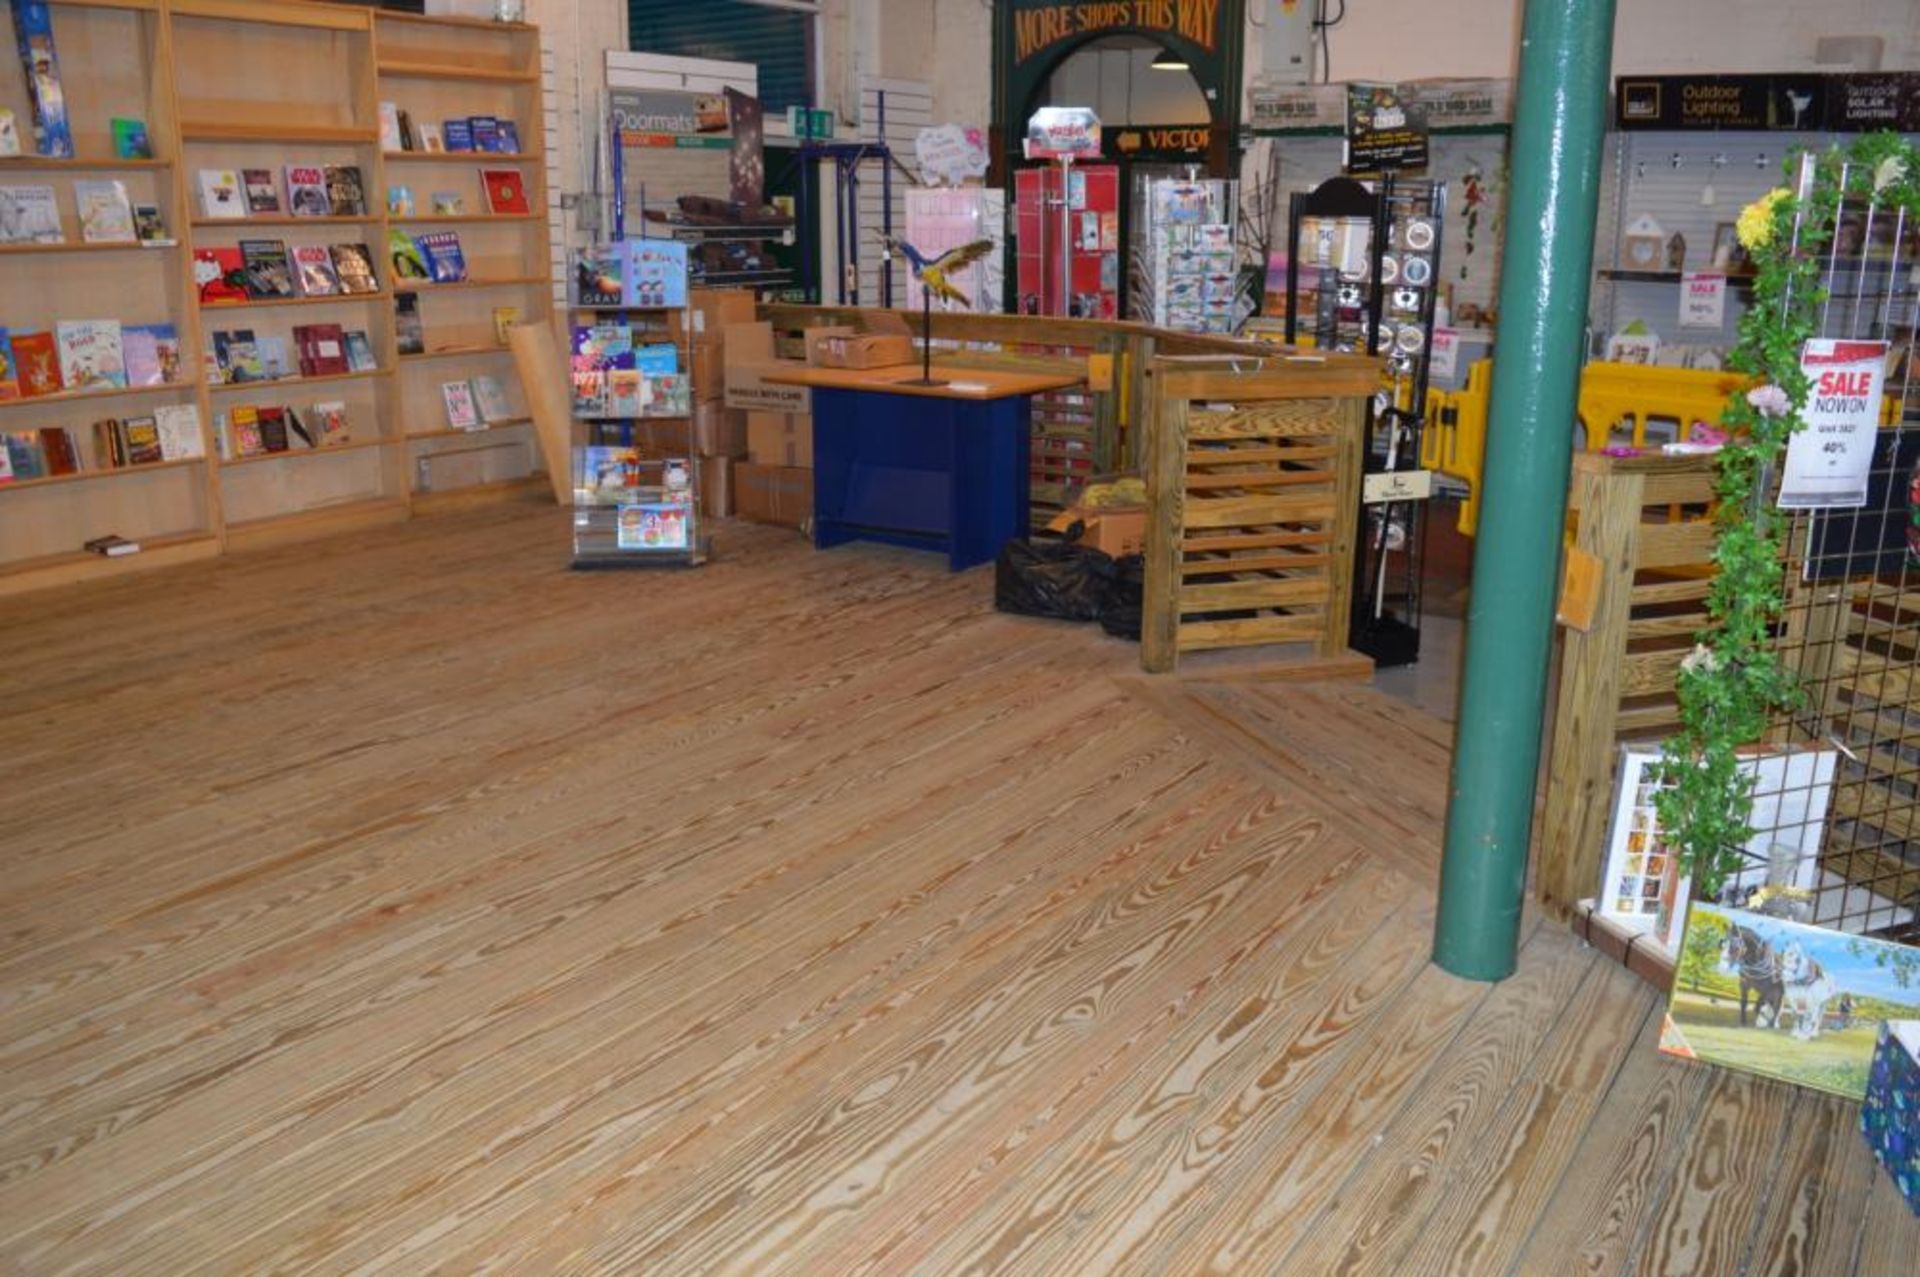 1 x Large Area of Raised Floor Decking - Indoor Use Only So in Very Good Condition - Features Fencin - Image 12 of 12